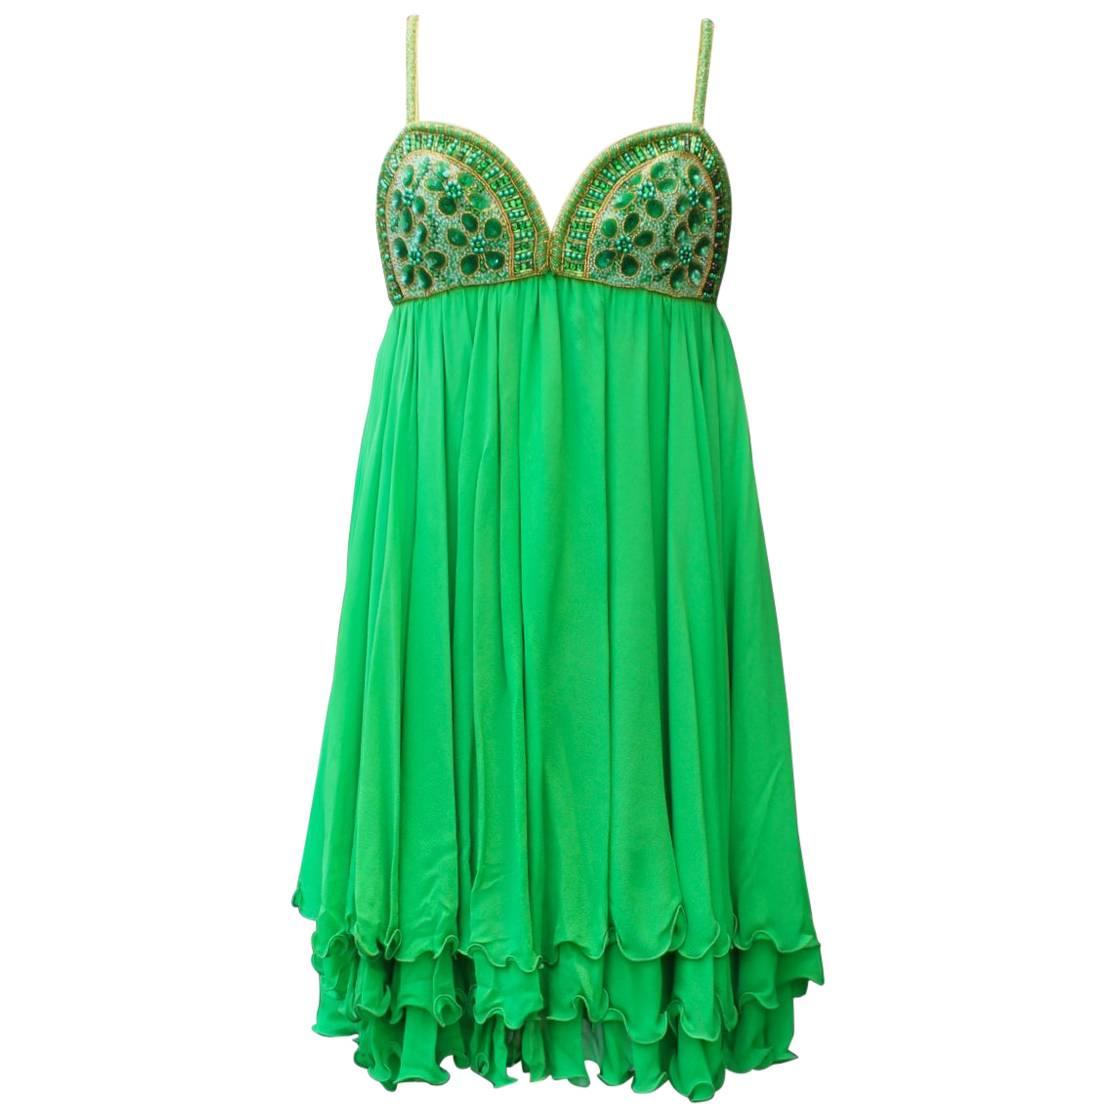 Serge Lepage Haute Couture embroidered green chiffon short dress, 1980s ...